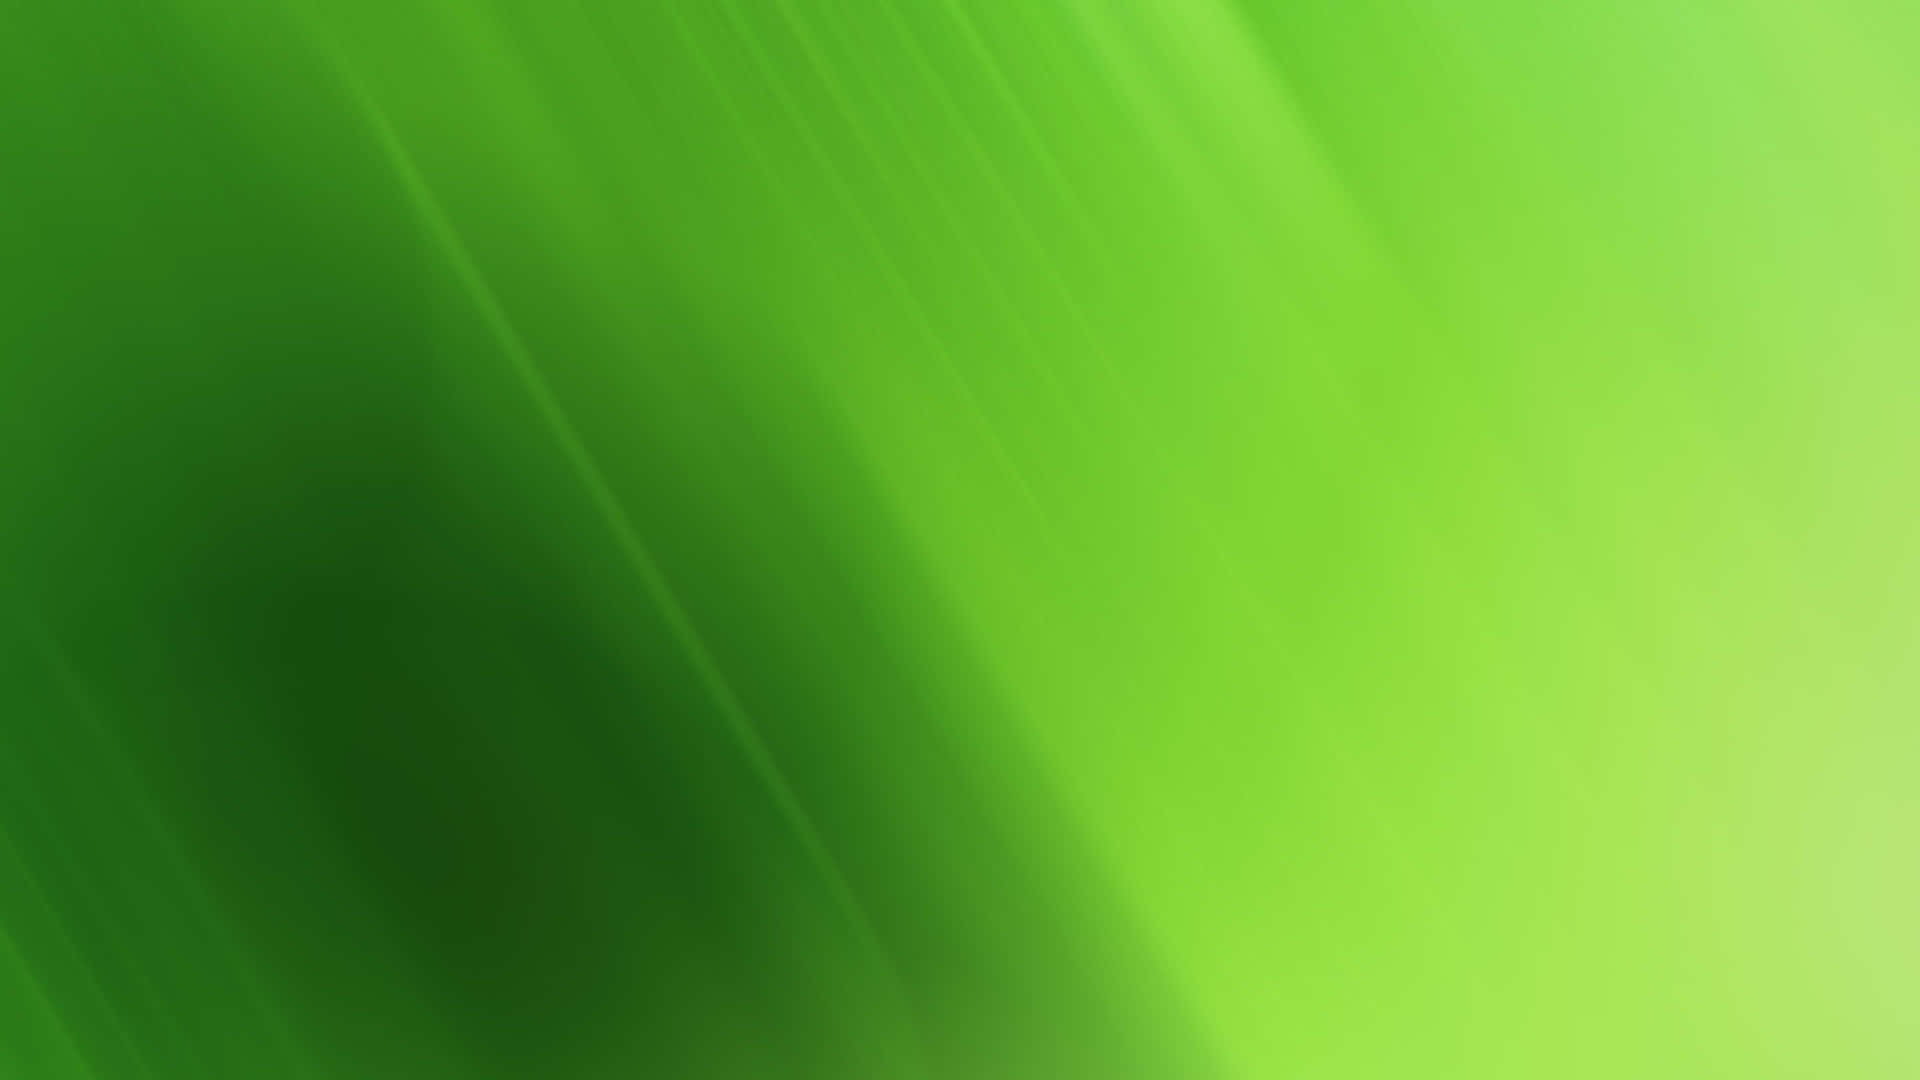 Green Abstract Background With Blurred Lines Wallpaper